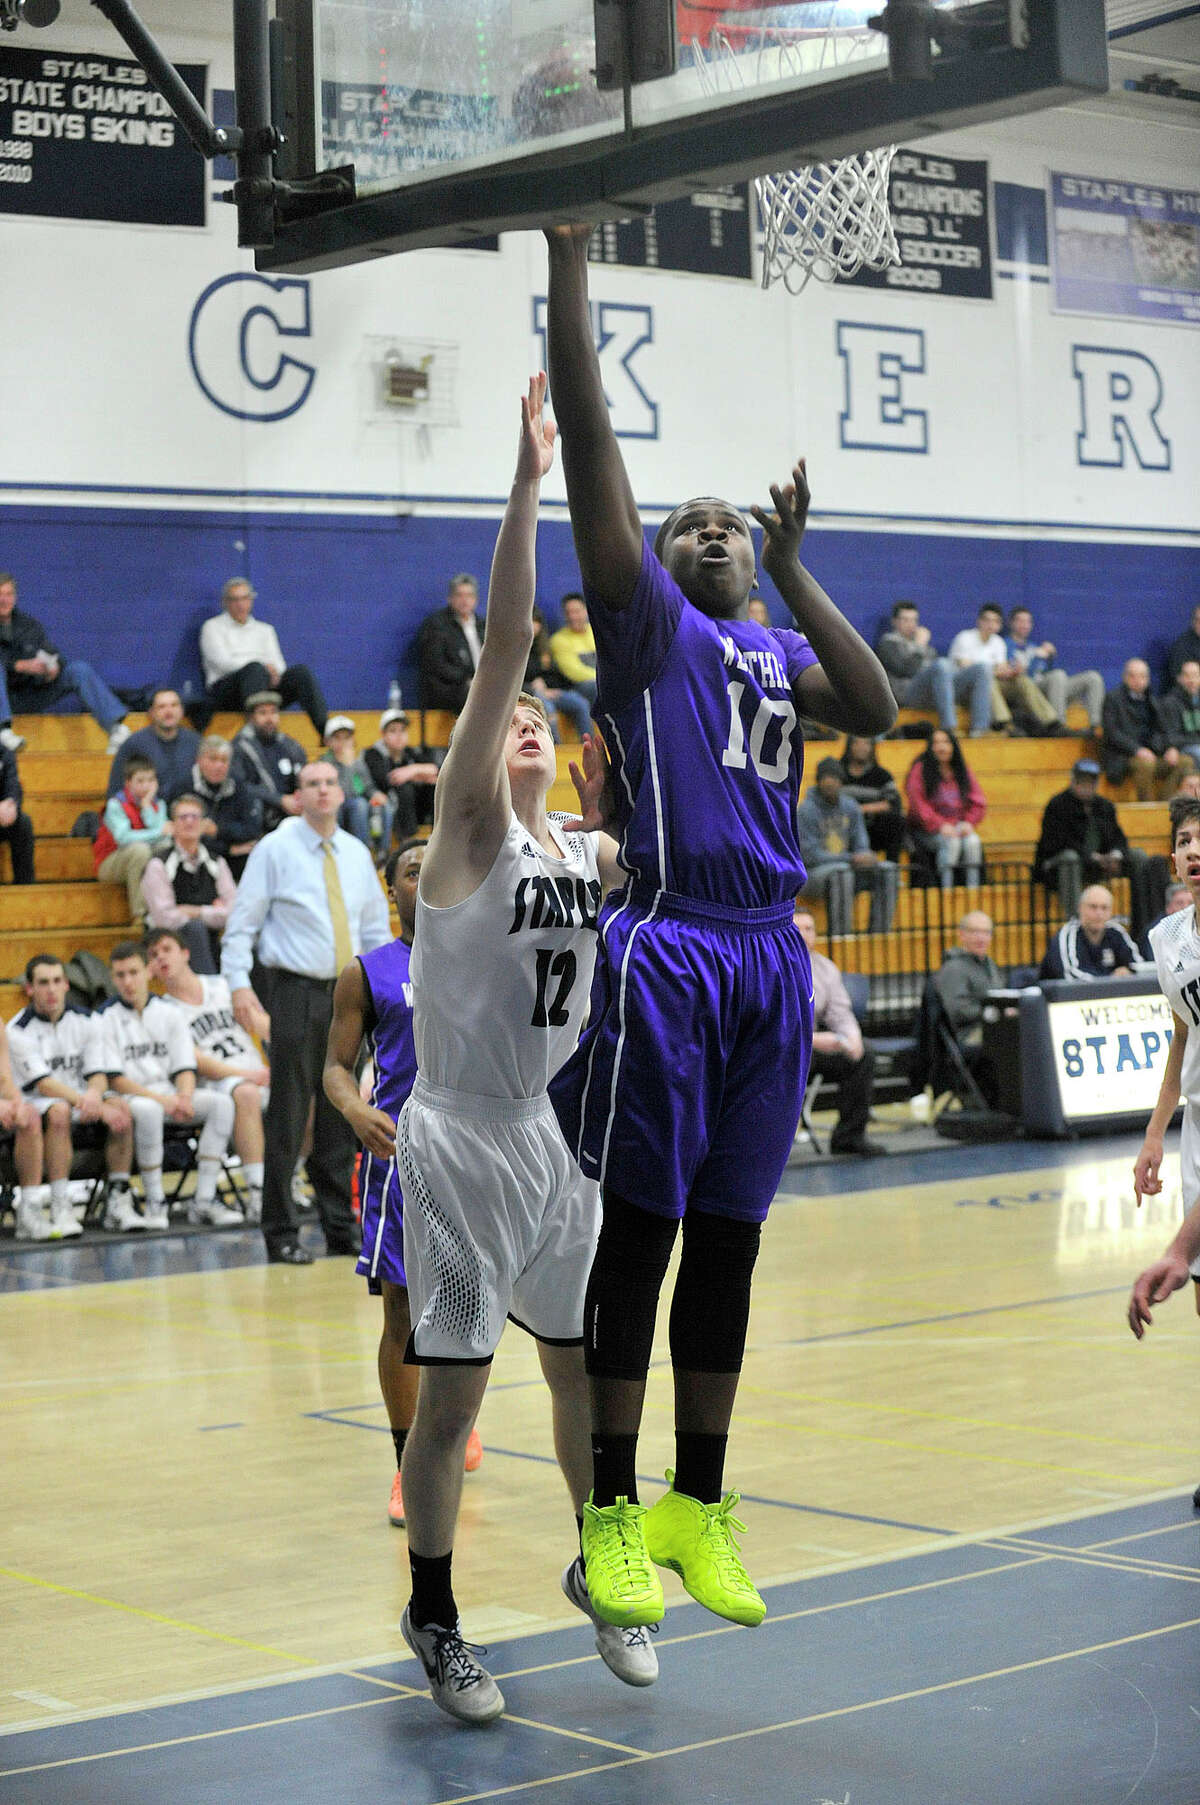 Westhill's Tyrell Alexander puts up a shot while under pressure from Staples' Sean Pritchett during their game at Staples High School in Westport, Conn., on Wednesday, Feb. 25, 2015. Westhill ended their season in FCIAC play undefeated by beating Staples, 64-43.